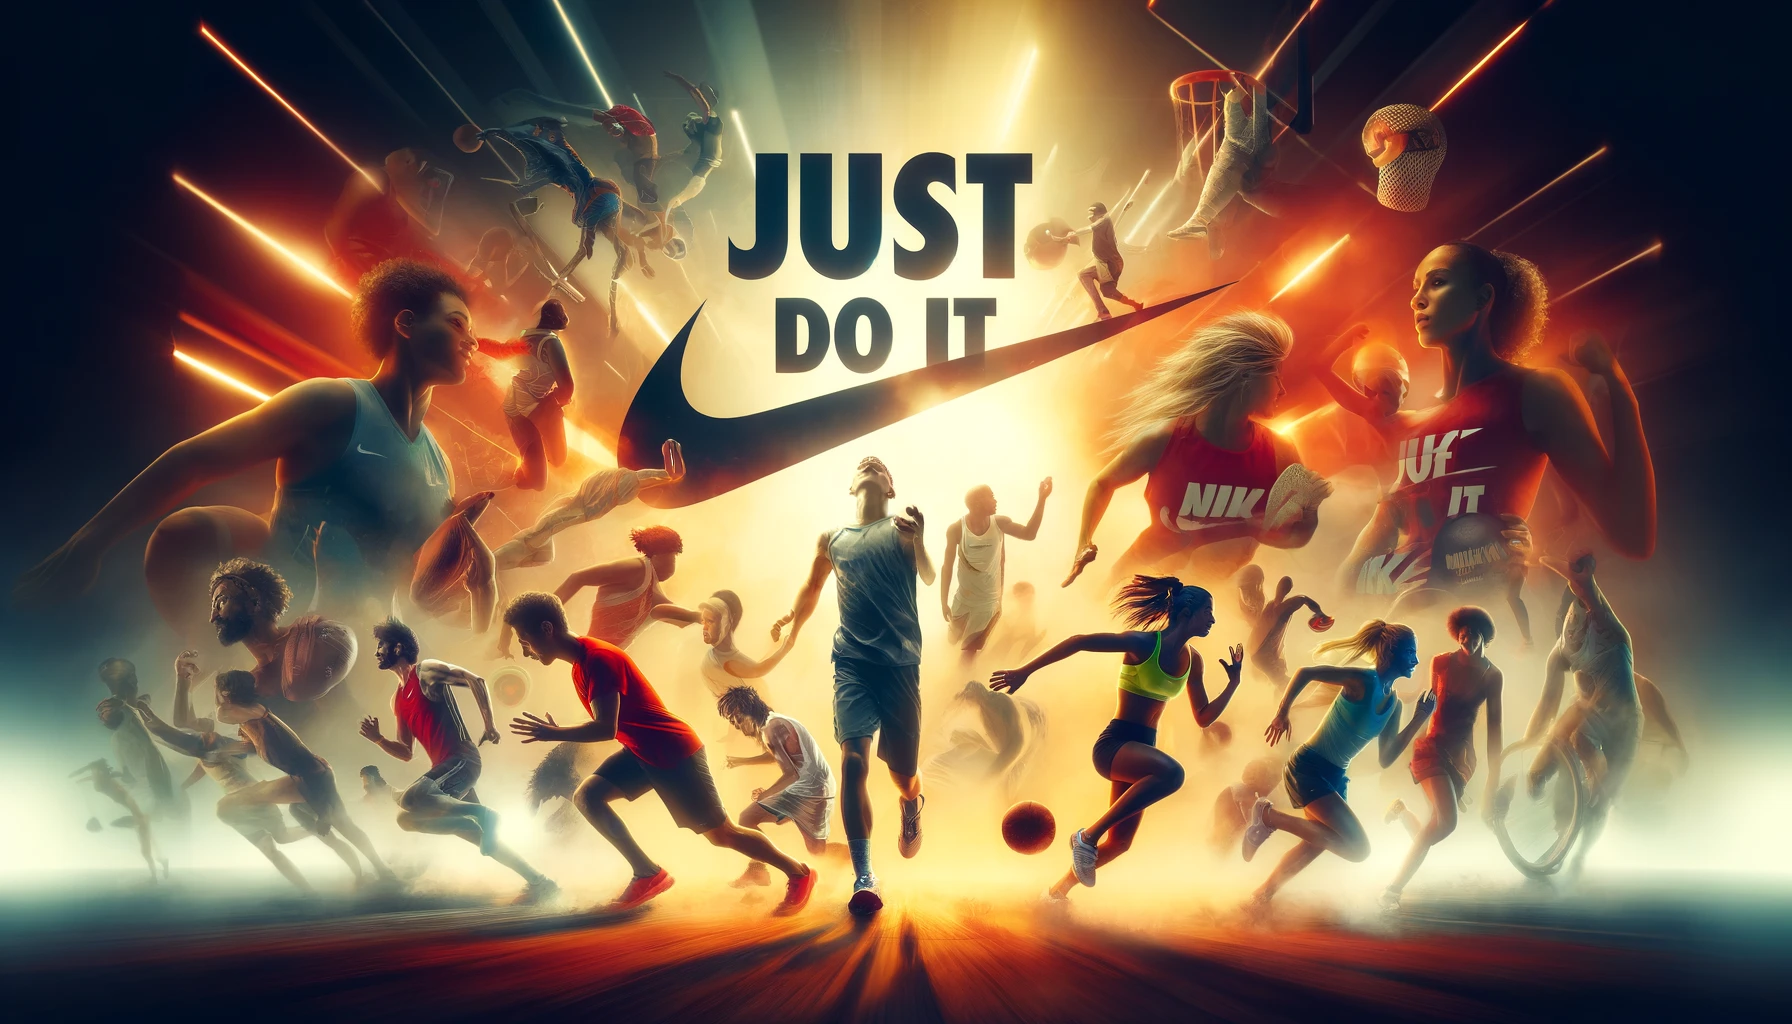 Nike 'Just Do It' visual marketing campaign featuring diverse athletes in dynamic action, wearing Nike gear while participating in sports like running, basketball, and soccer. The image emphasizes motivation and emotion, showcasing the power of minimal text and compelling visuals in an energetic setting, aligned with engagement strategies and visual storytelling.